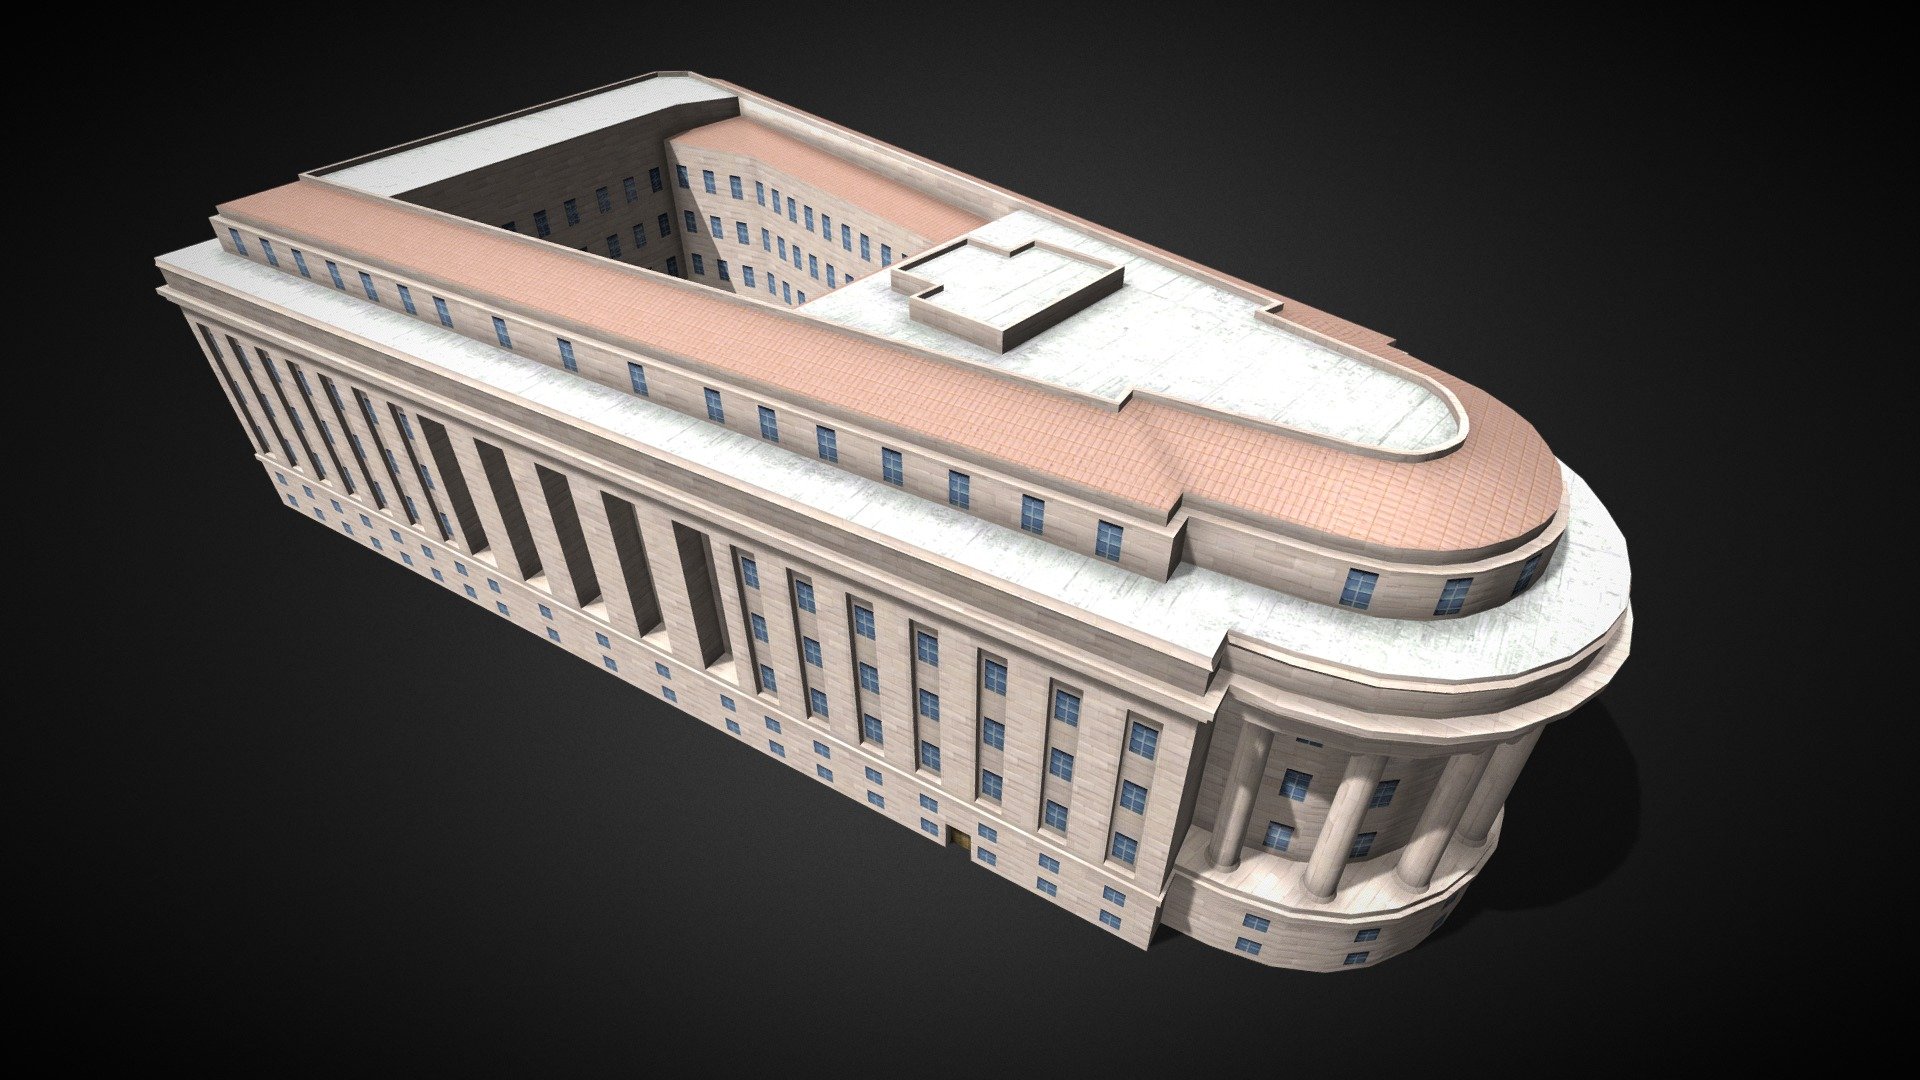 Material:4
Textures:1024x1024 - Federal Trade Commission Library Low Poly - 3D model by Ruslan Malovsky (@malovsky) 3d model